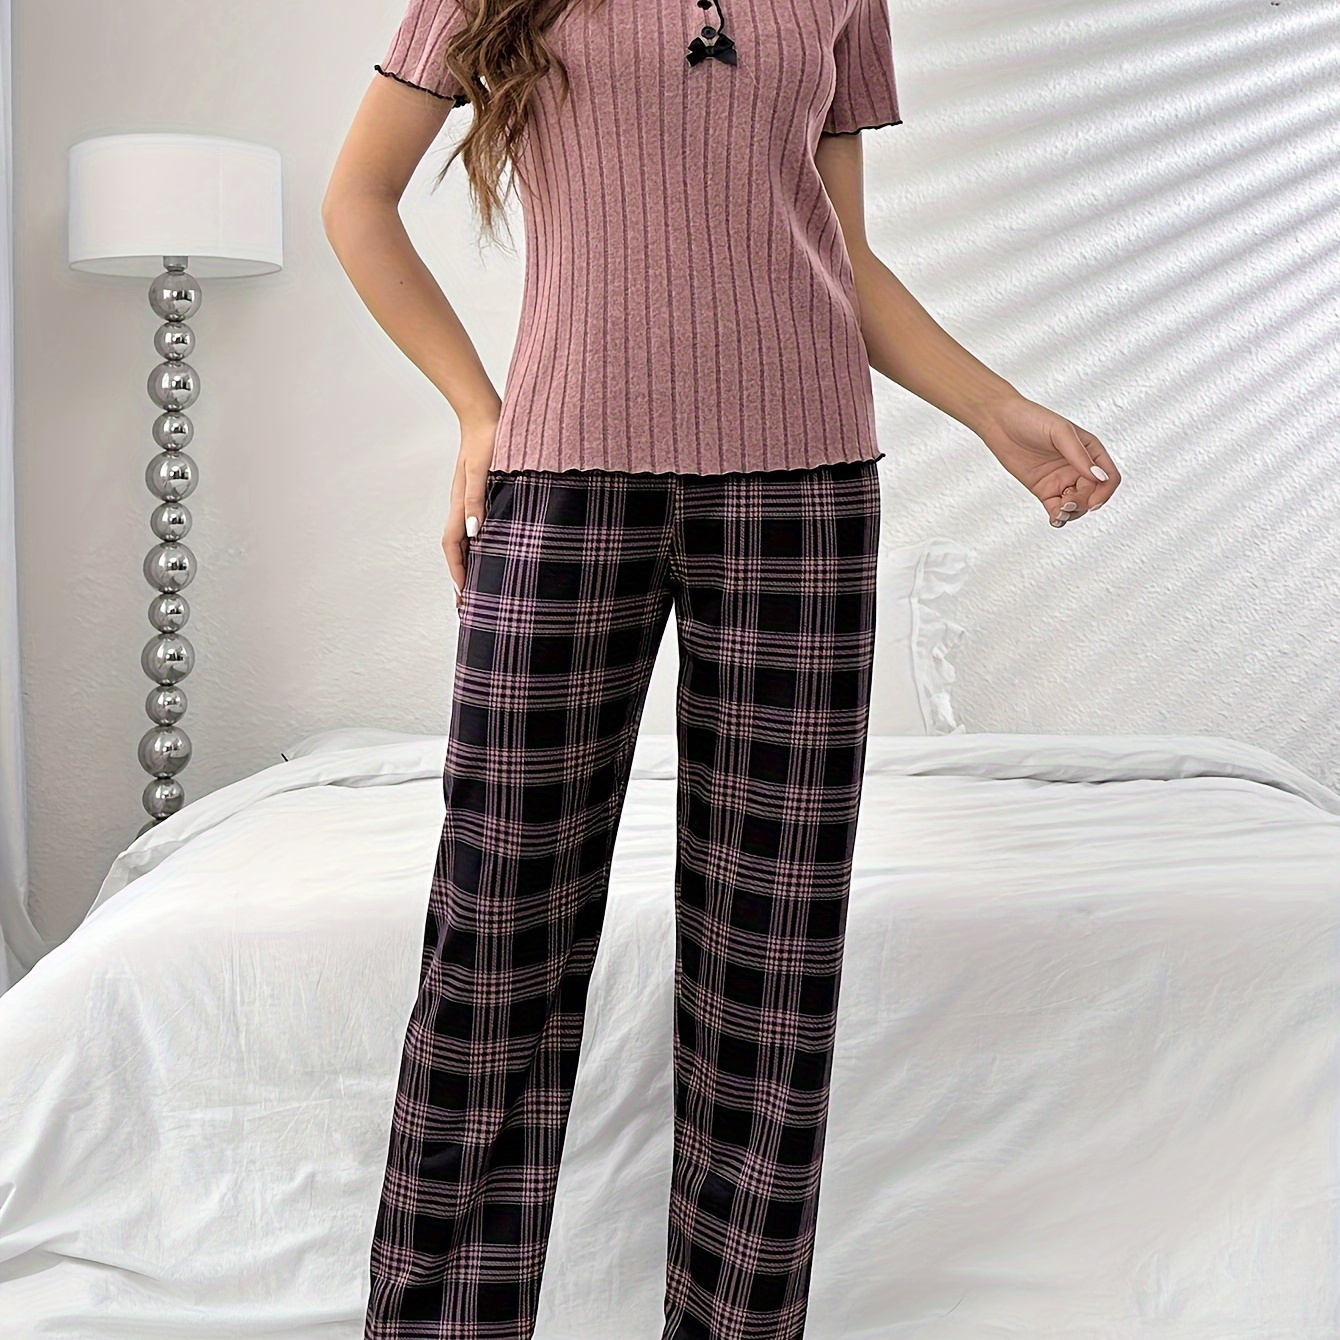 

Women's Plaid Print Casual Pajama Set, Short Sleeve Round Neck Half Button Frill Trim Top & Pants, Comfortable Relaxed Fit, Summer Nightwear